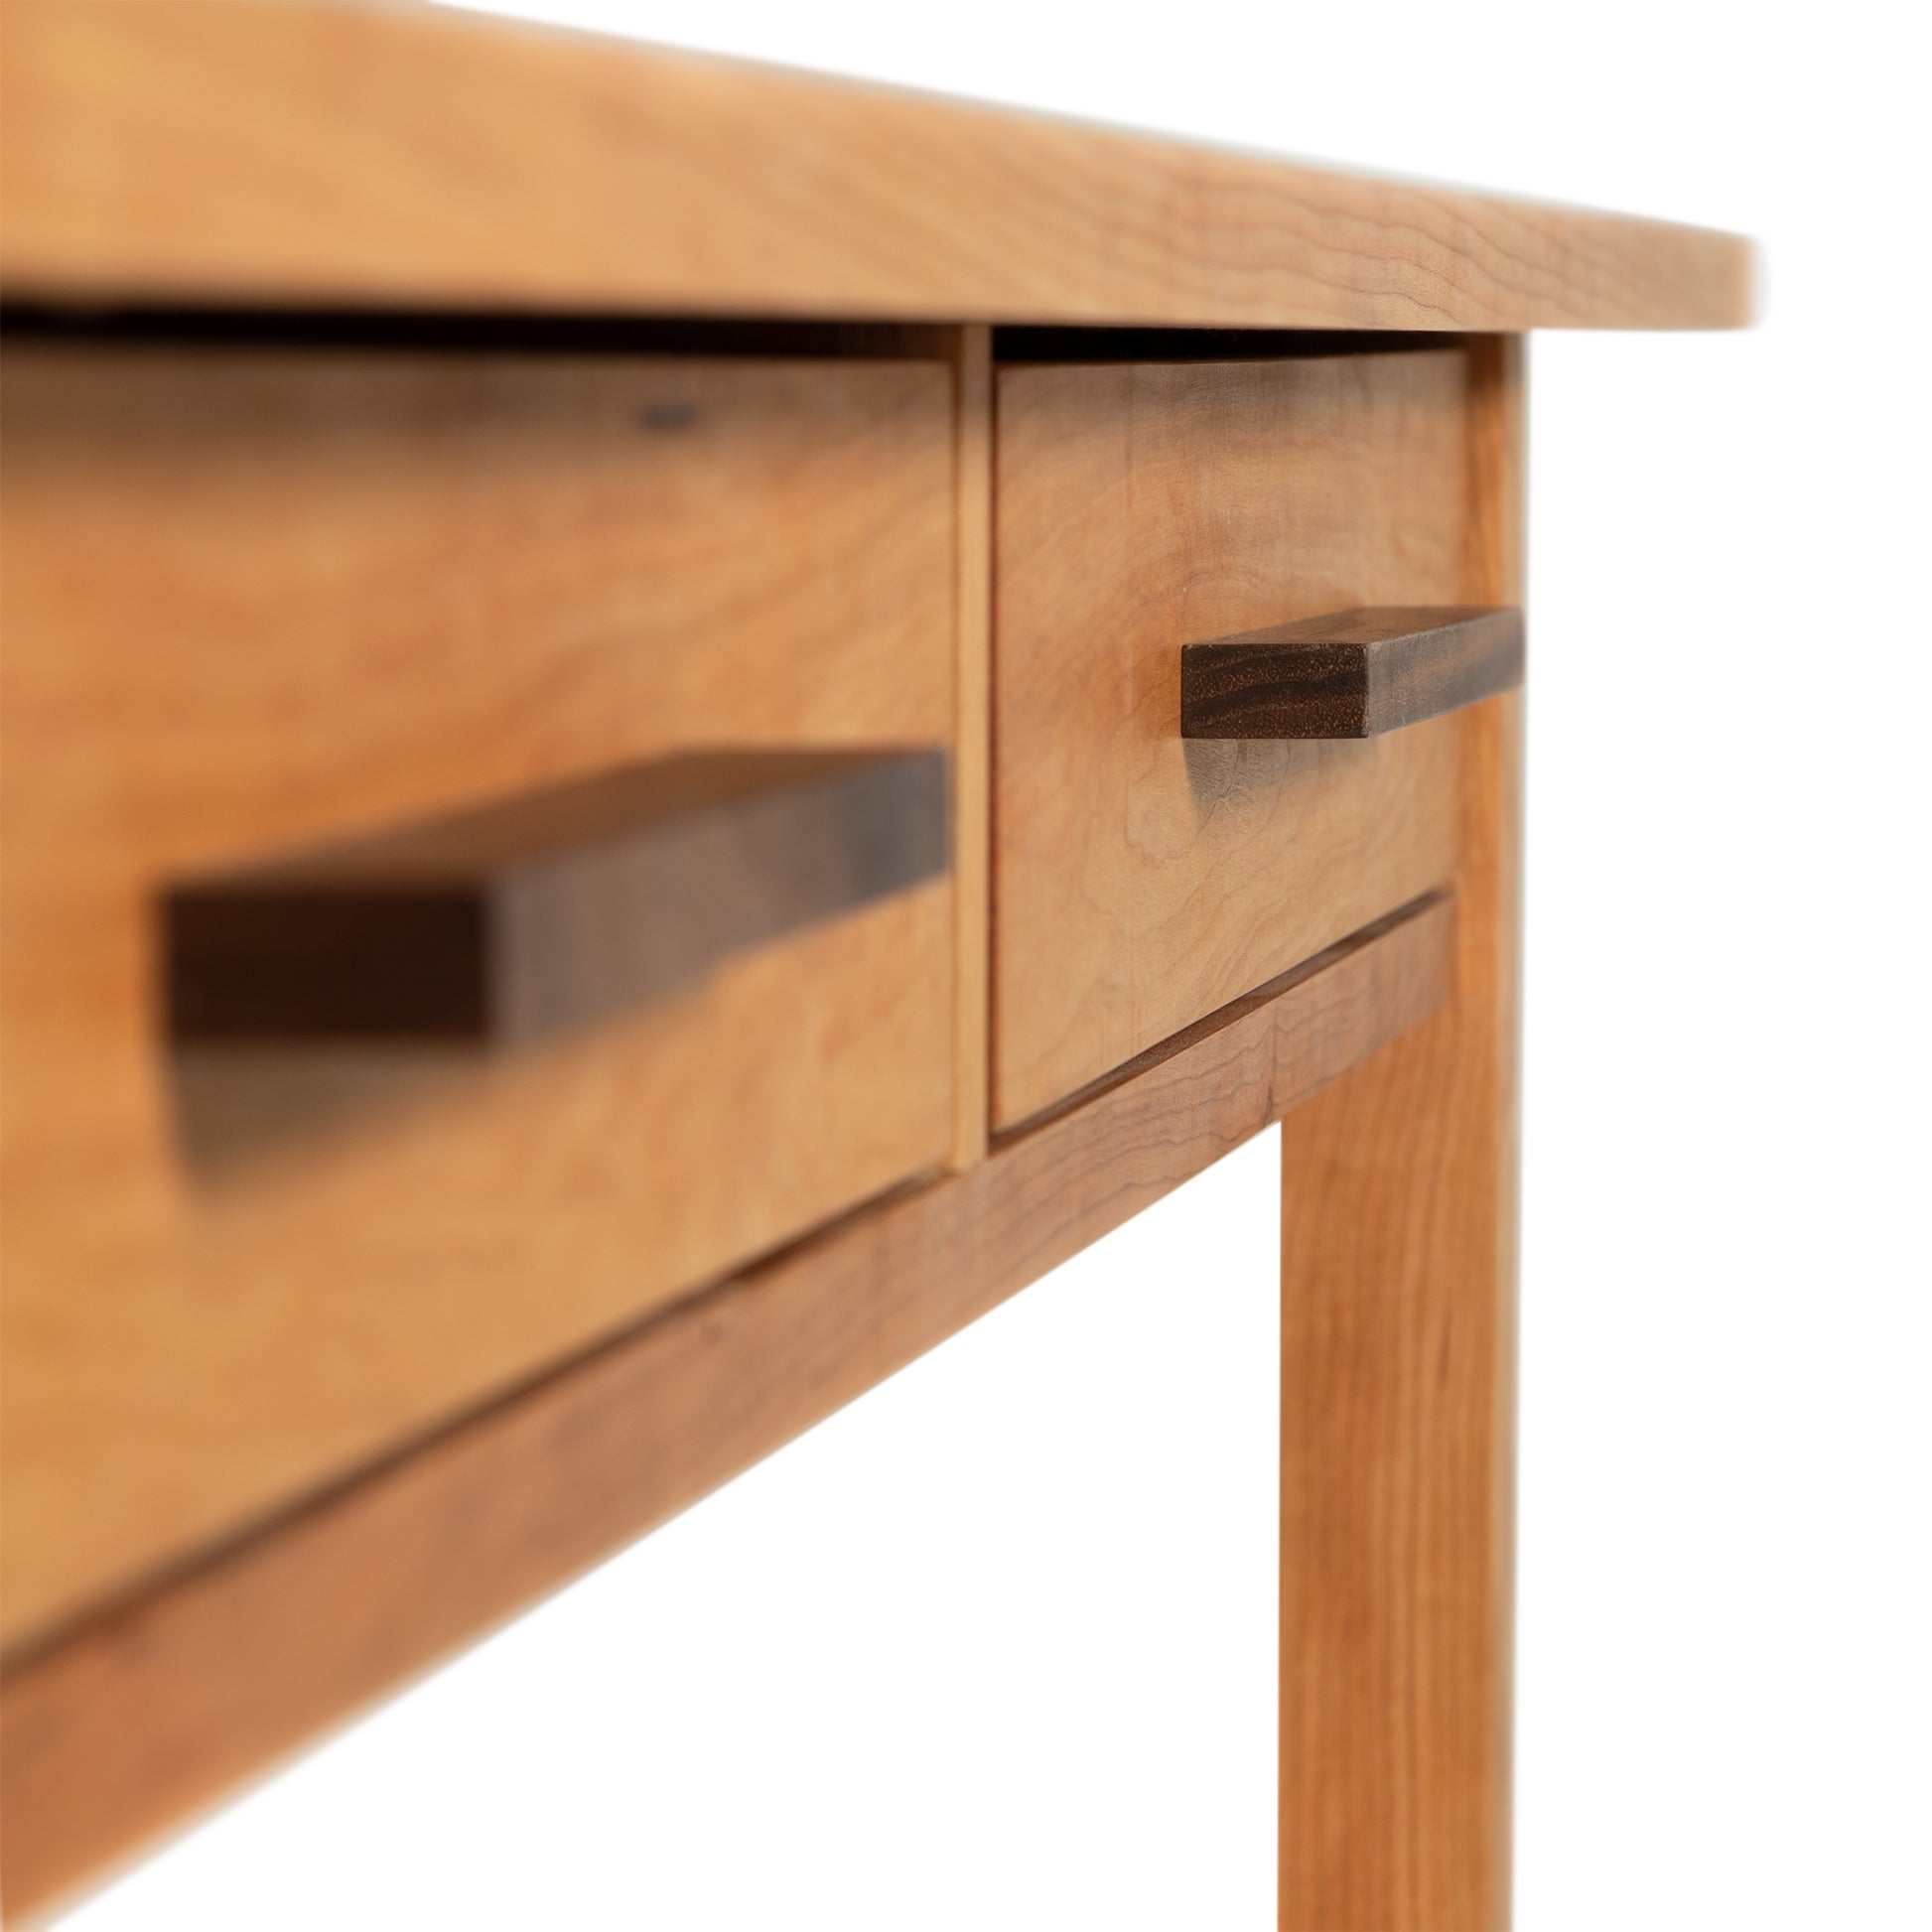 Handcrafted furniture Vermont Furniture Designs Modern Craftsman 2-Drawer Console Table with a visible drawer and handle, isolated against a white background.